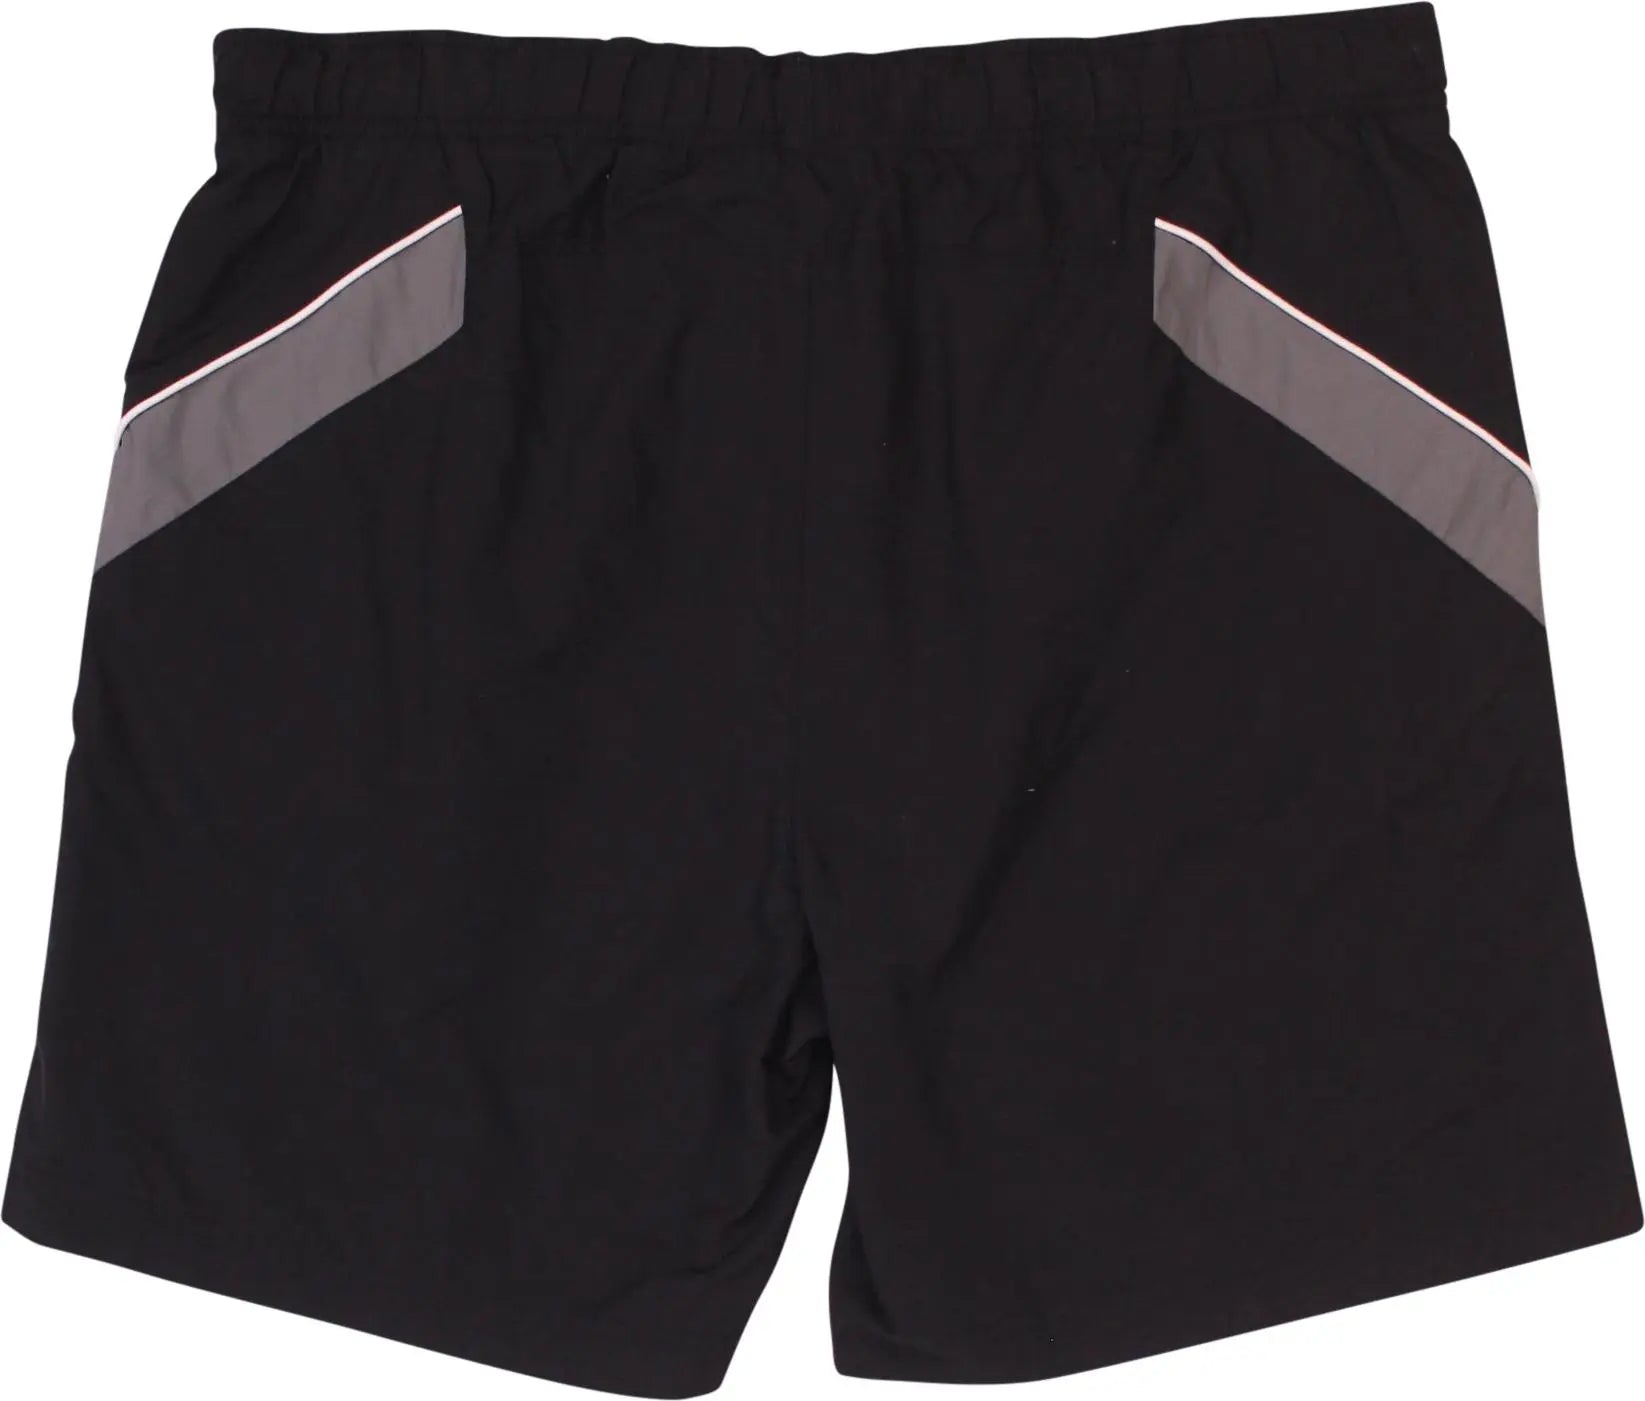 Nike - Black Nike Training Shorts- ThriftTale.com - Vintage and second handclothing